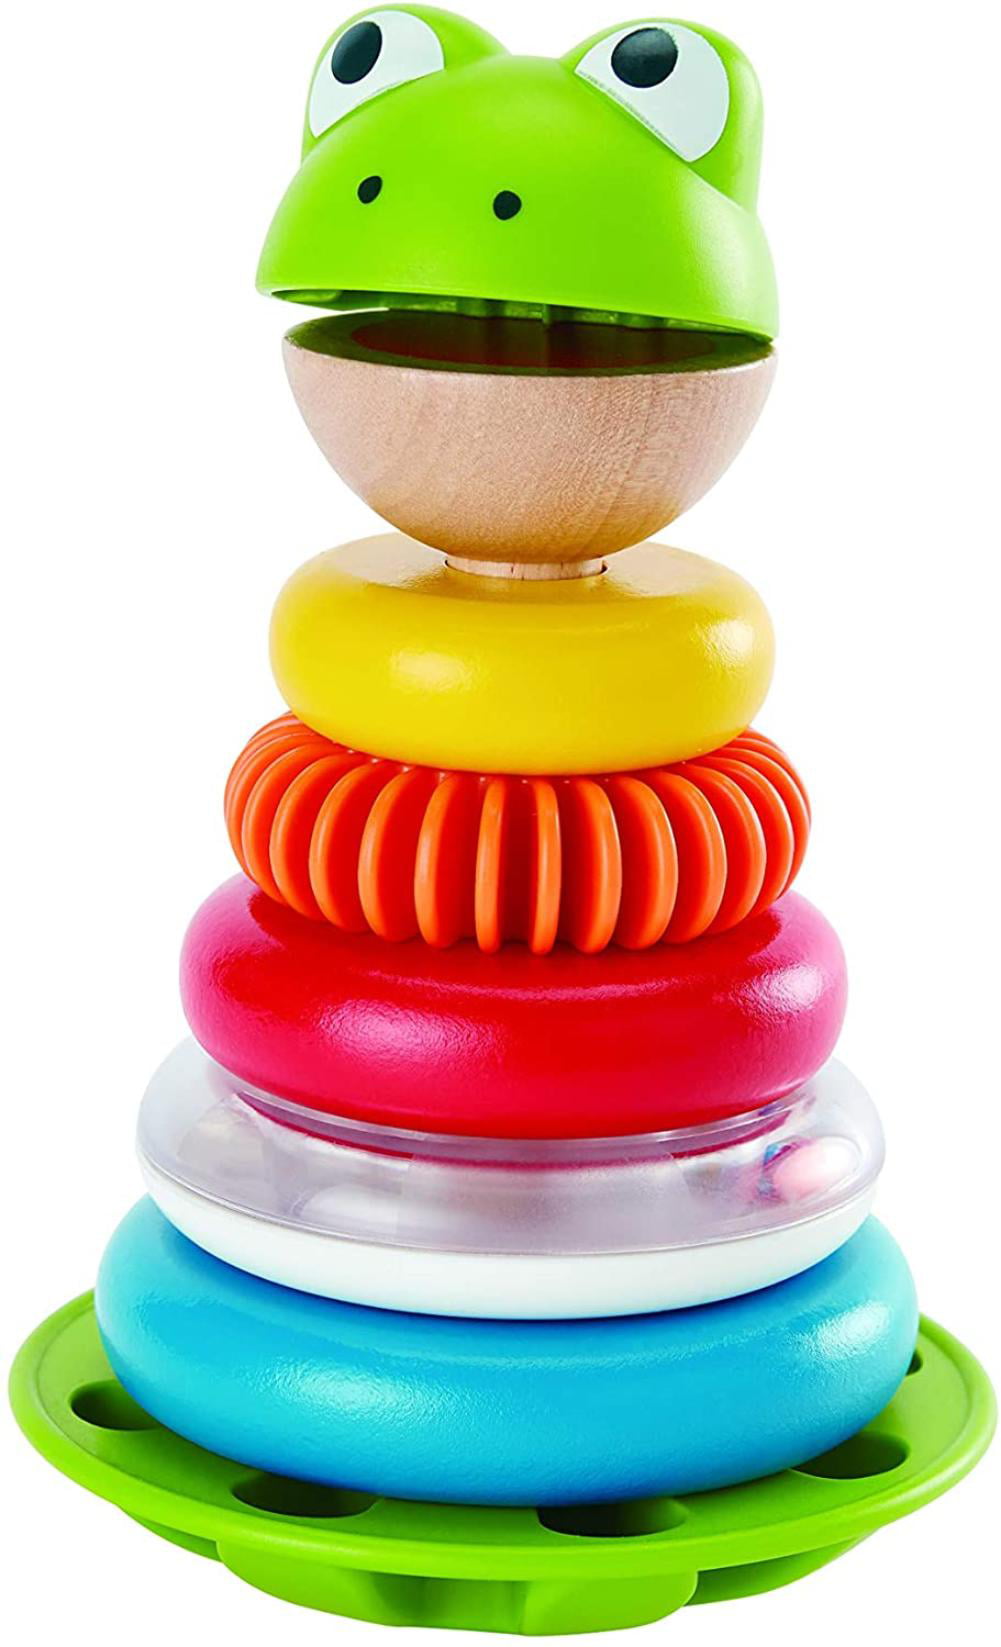 Frog Stacking Rings Educational Toy for Children Hape Mr Multicolor Wooden Ring Stacker Play Set